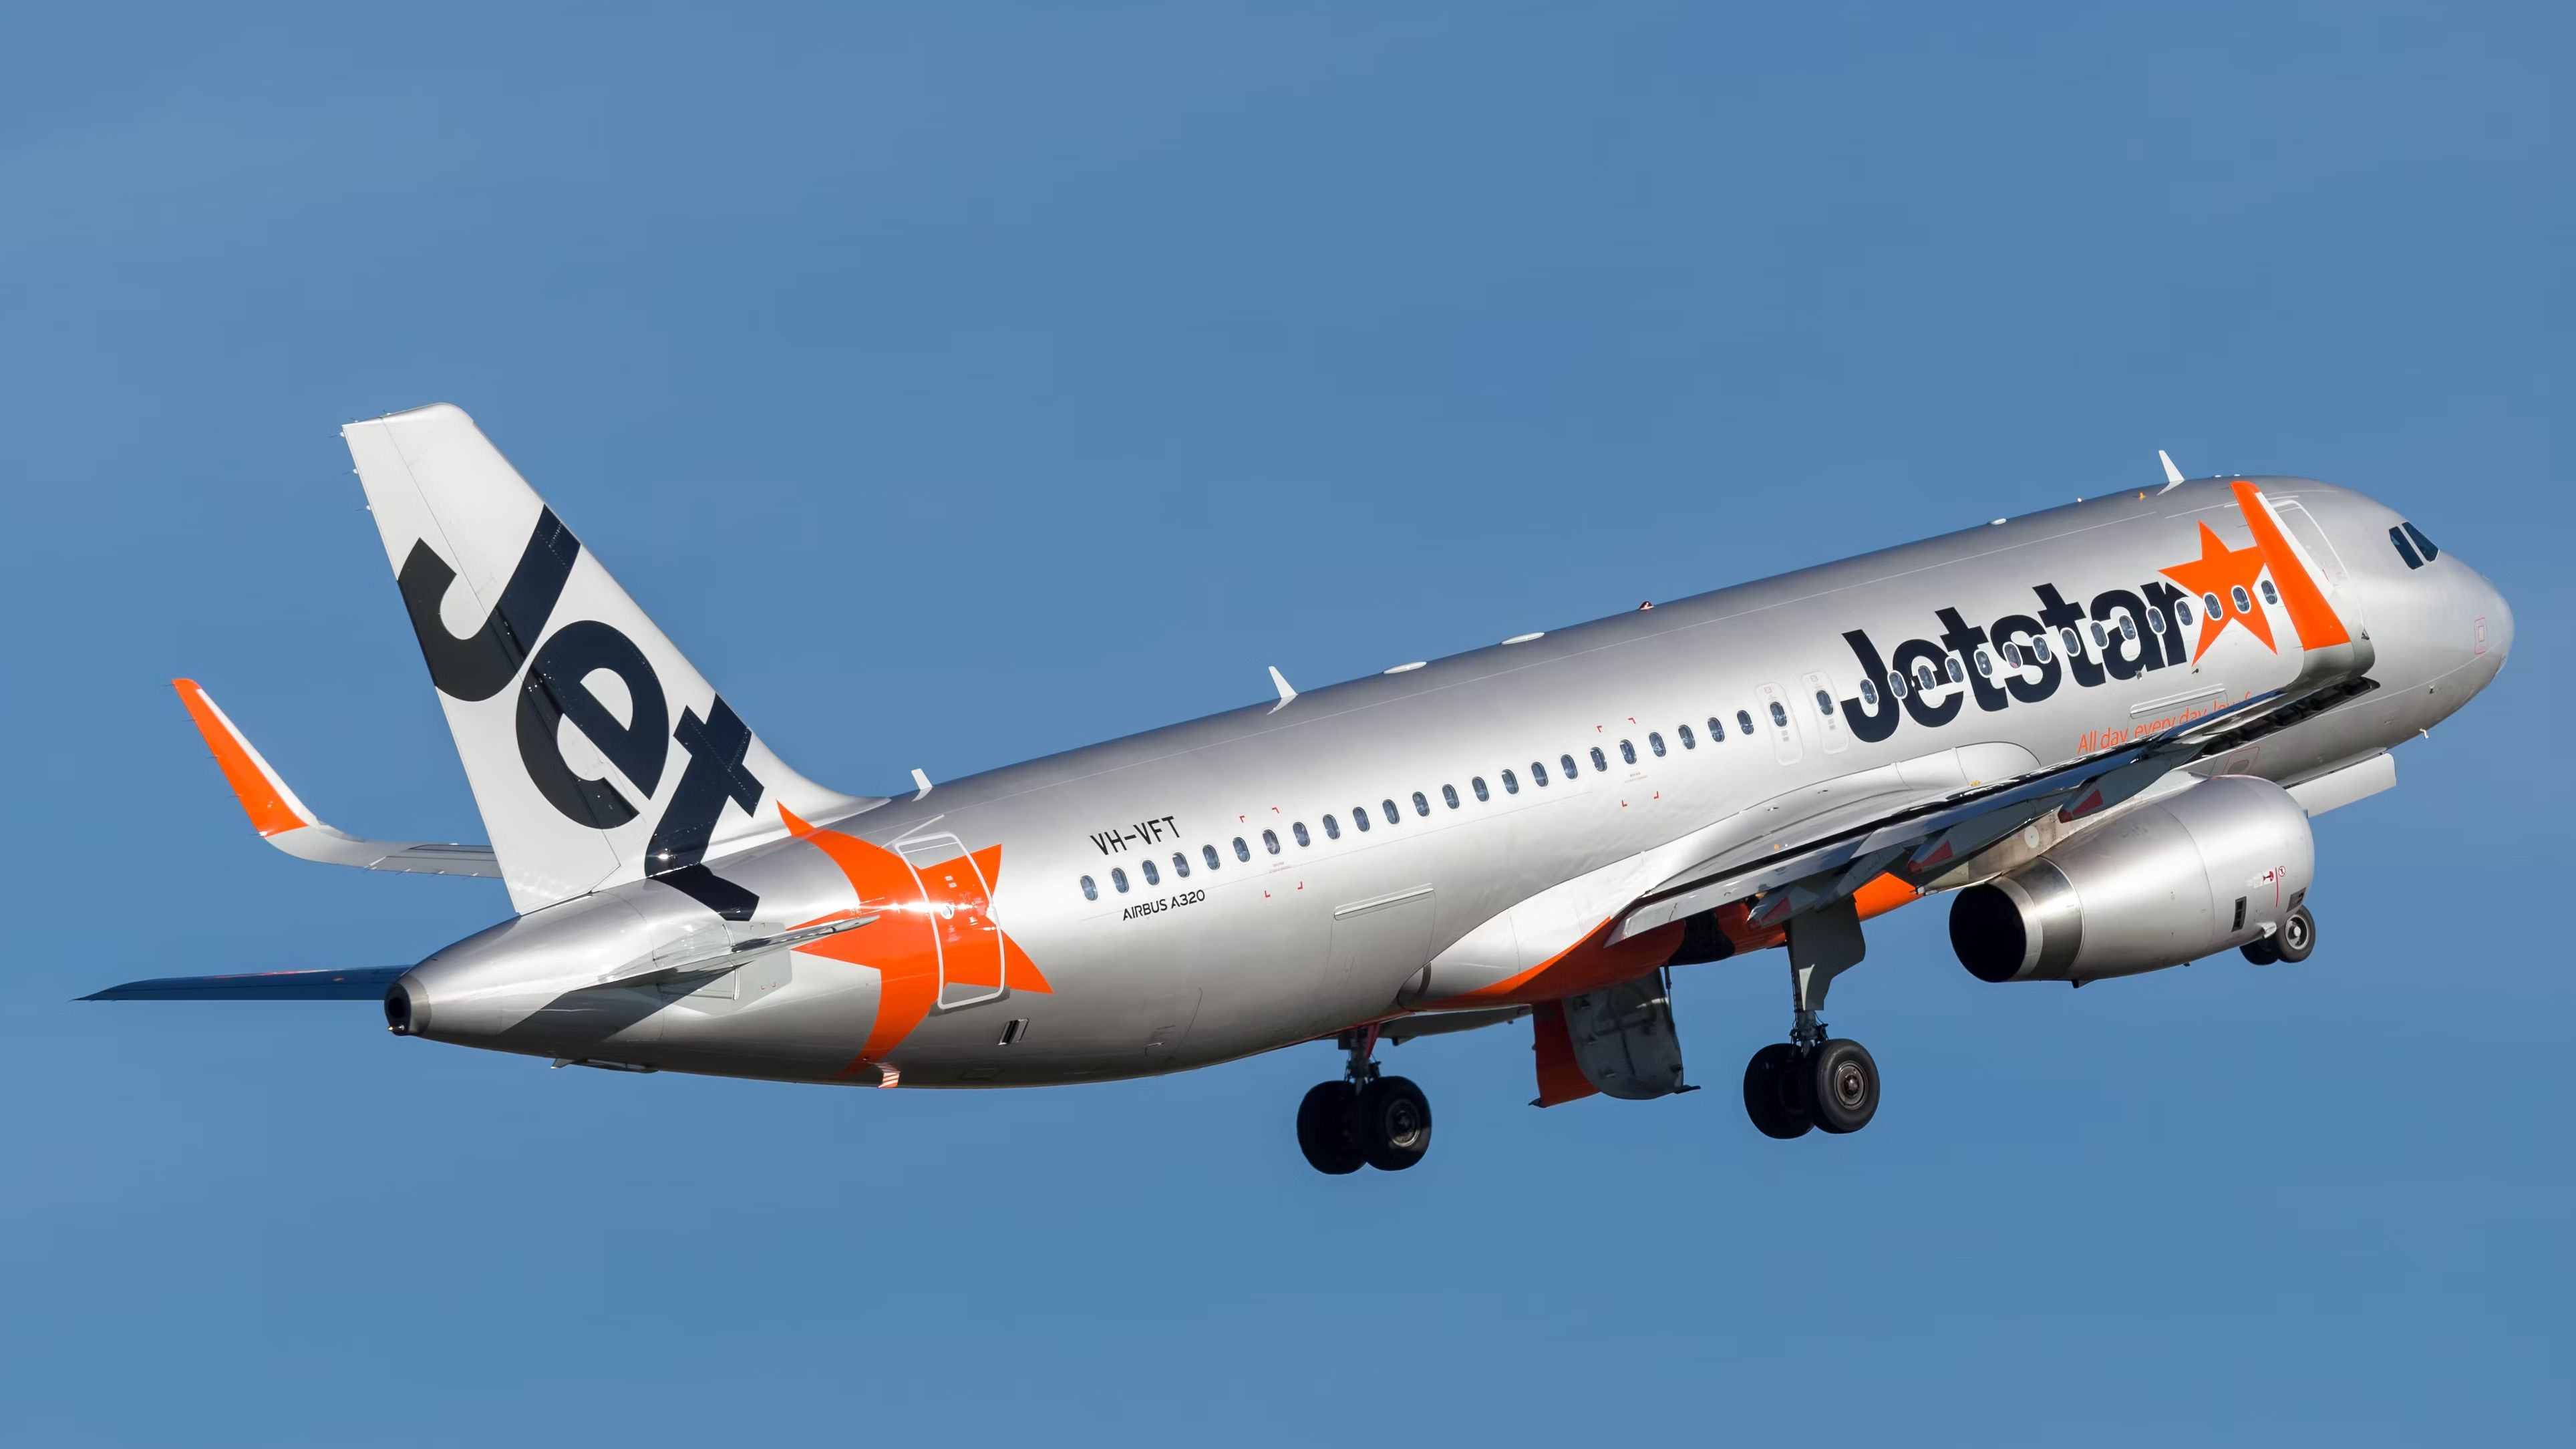 A Jetstar Airbus A321 flying in the sky.